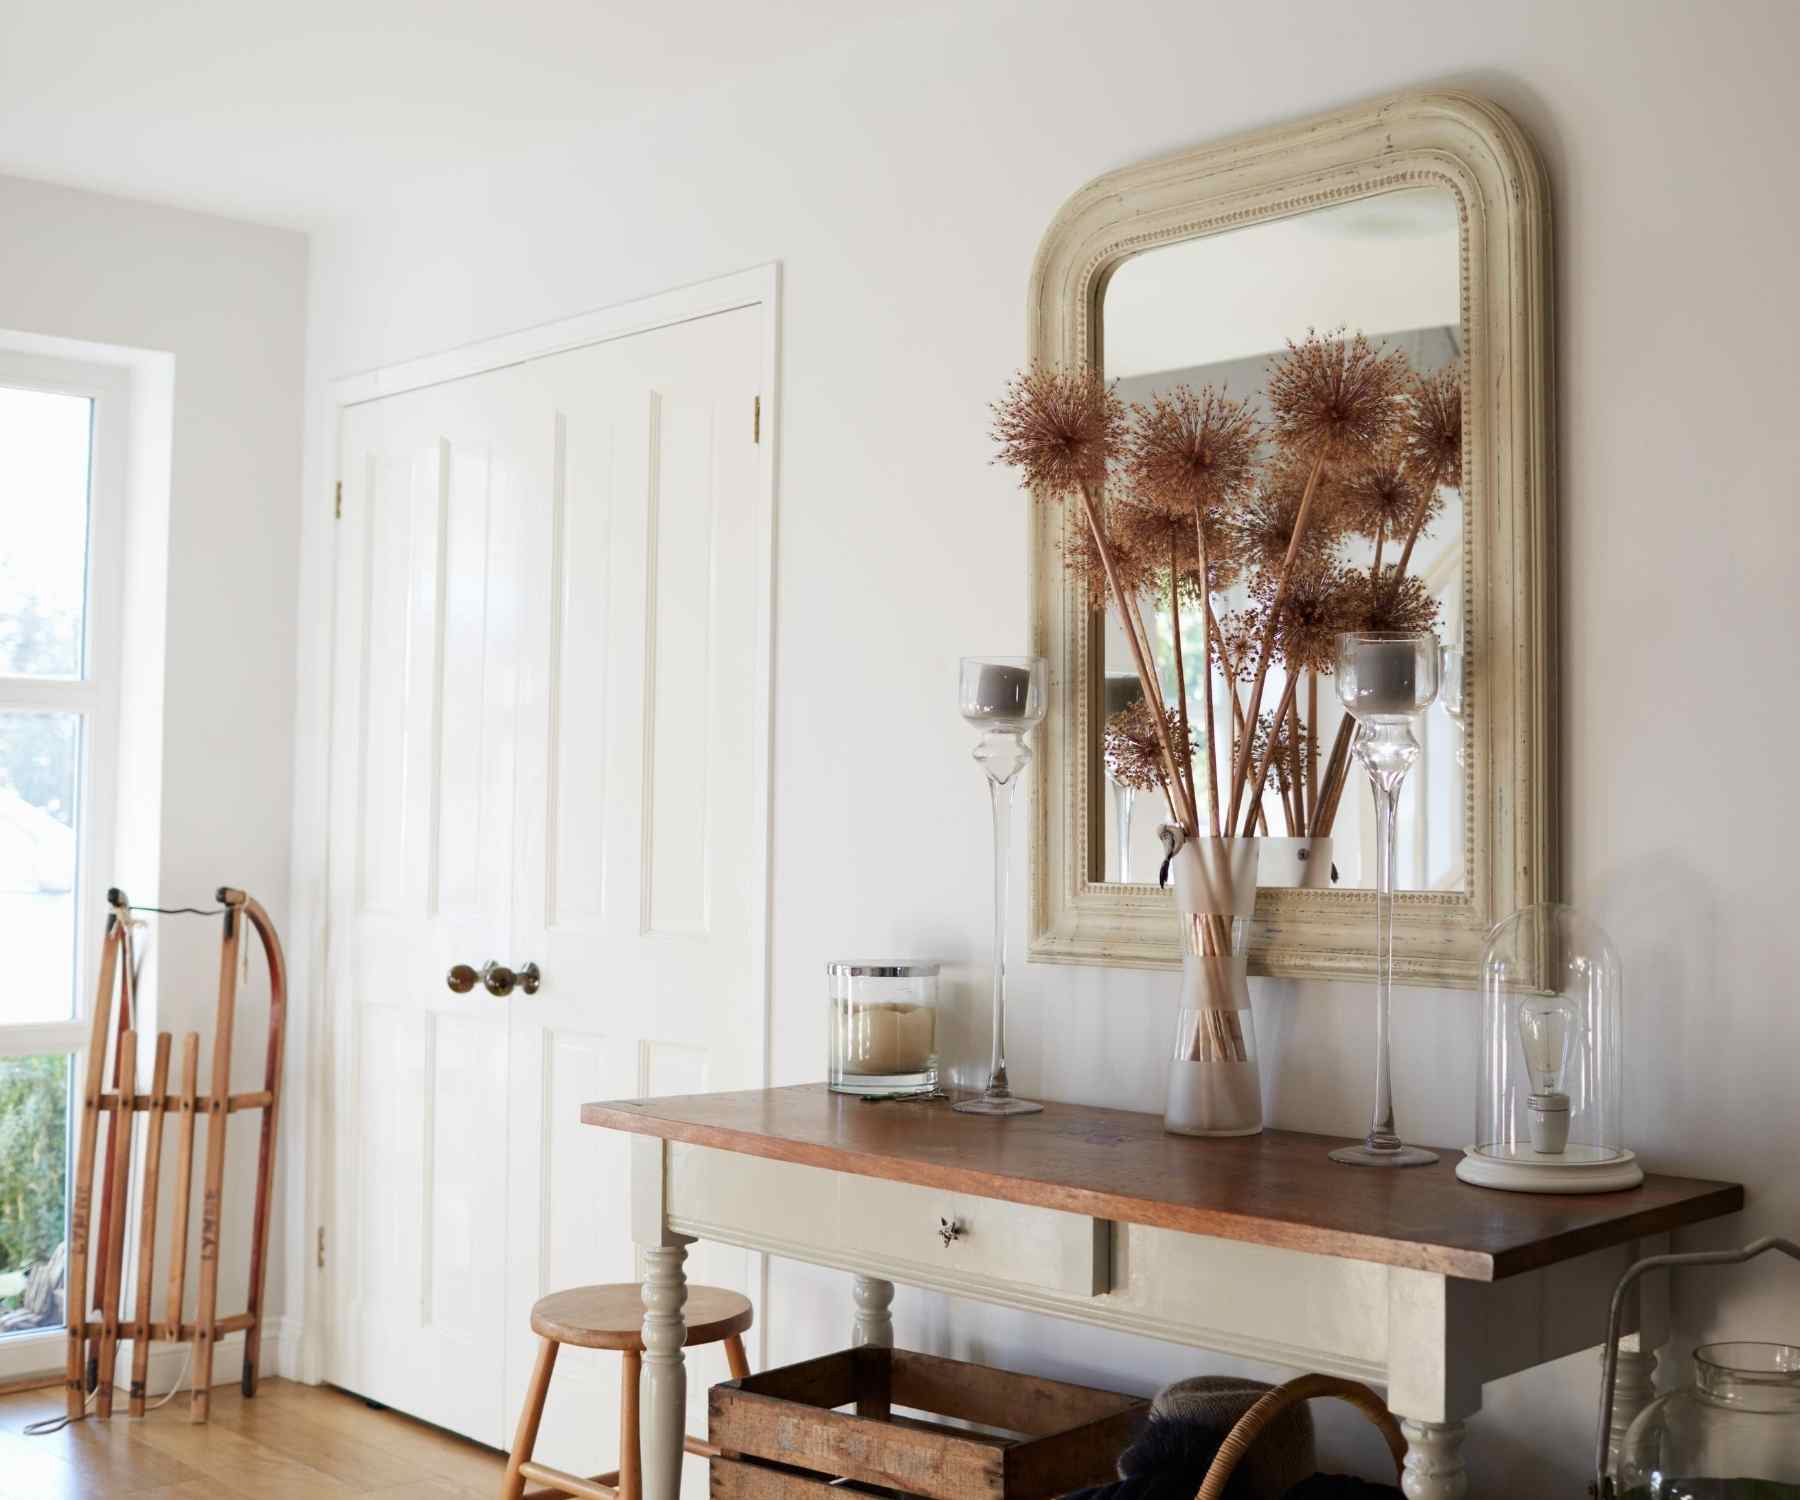 Bright hallway with wooden console table and mirror with dried flowers in vase